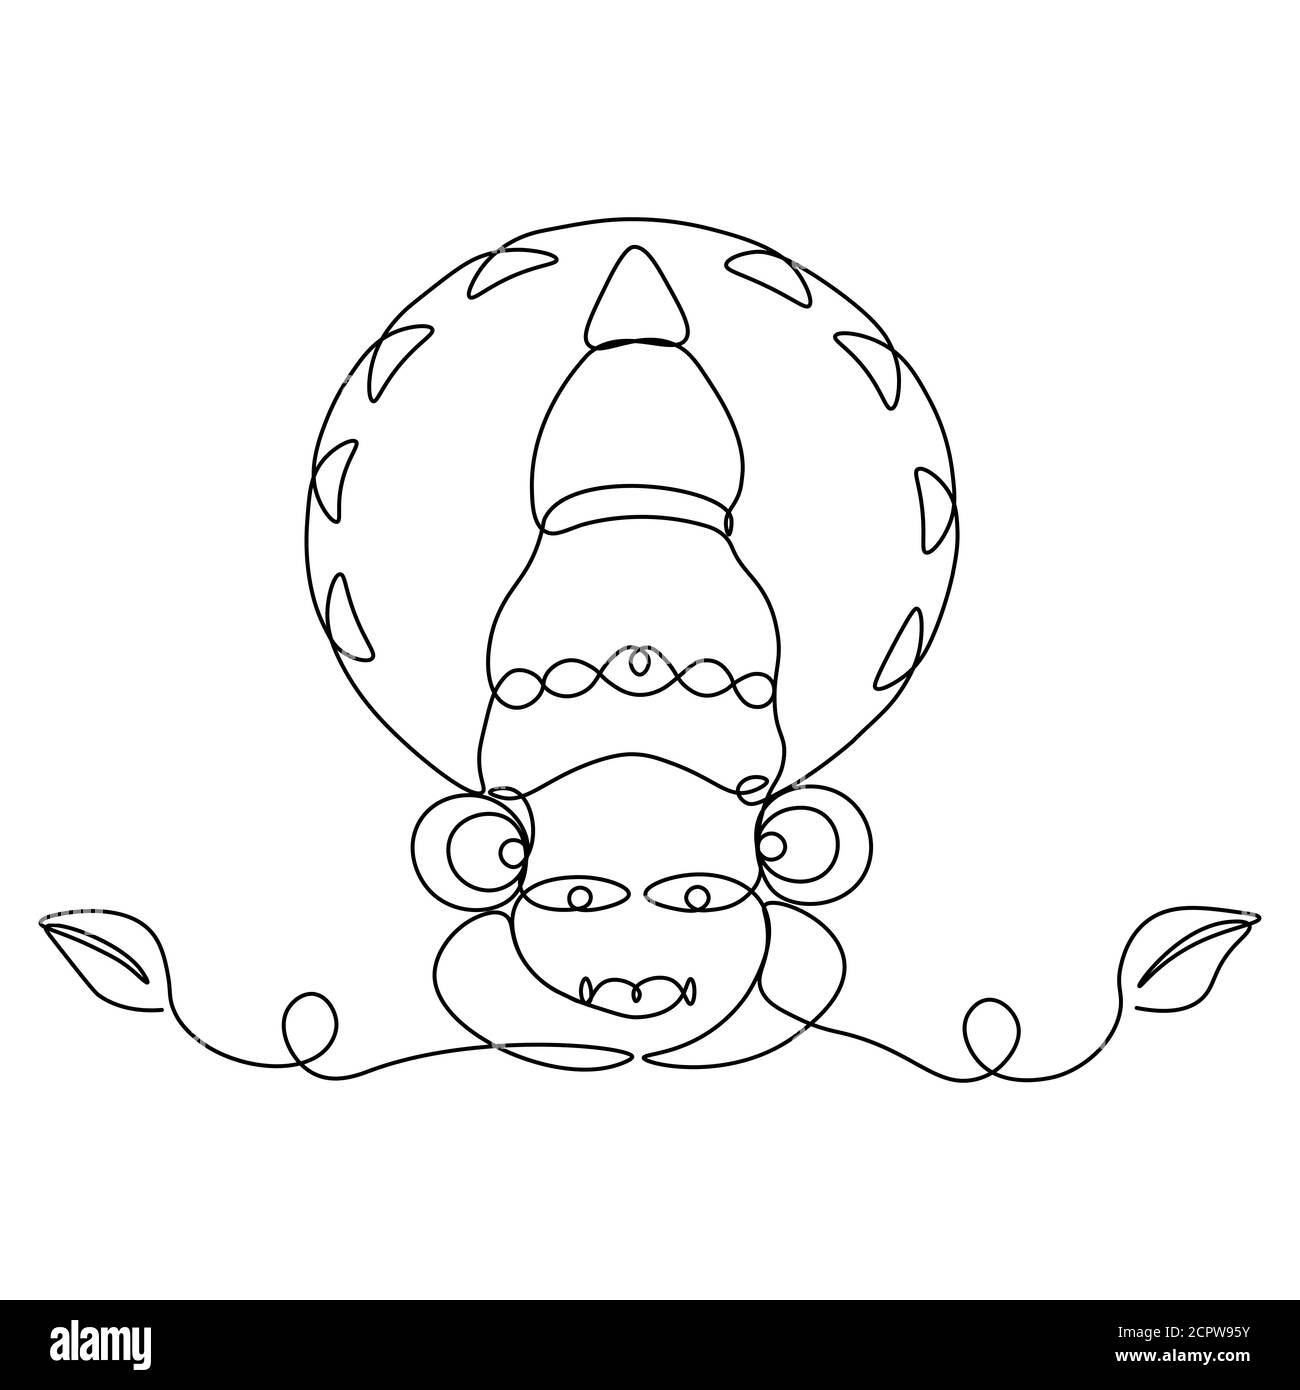 Happy Onam Kathakali illustration drawn with a continuous single line... Stock Vector